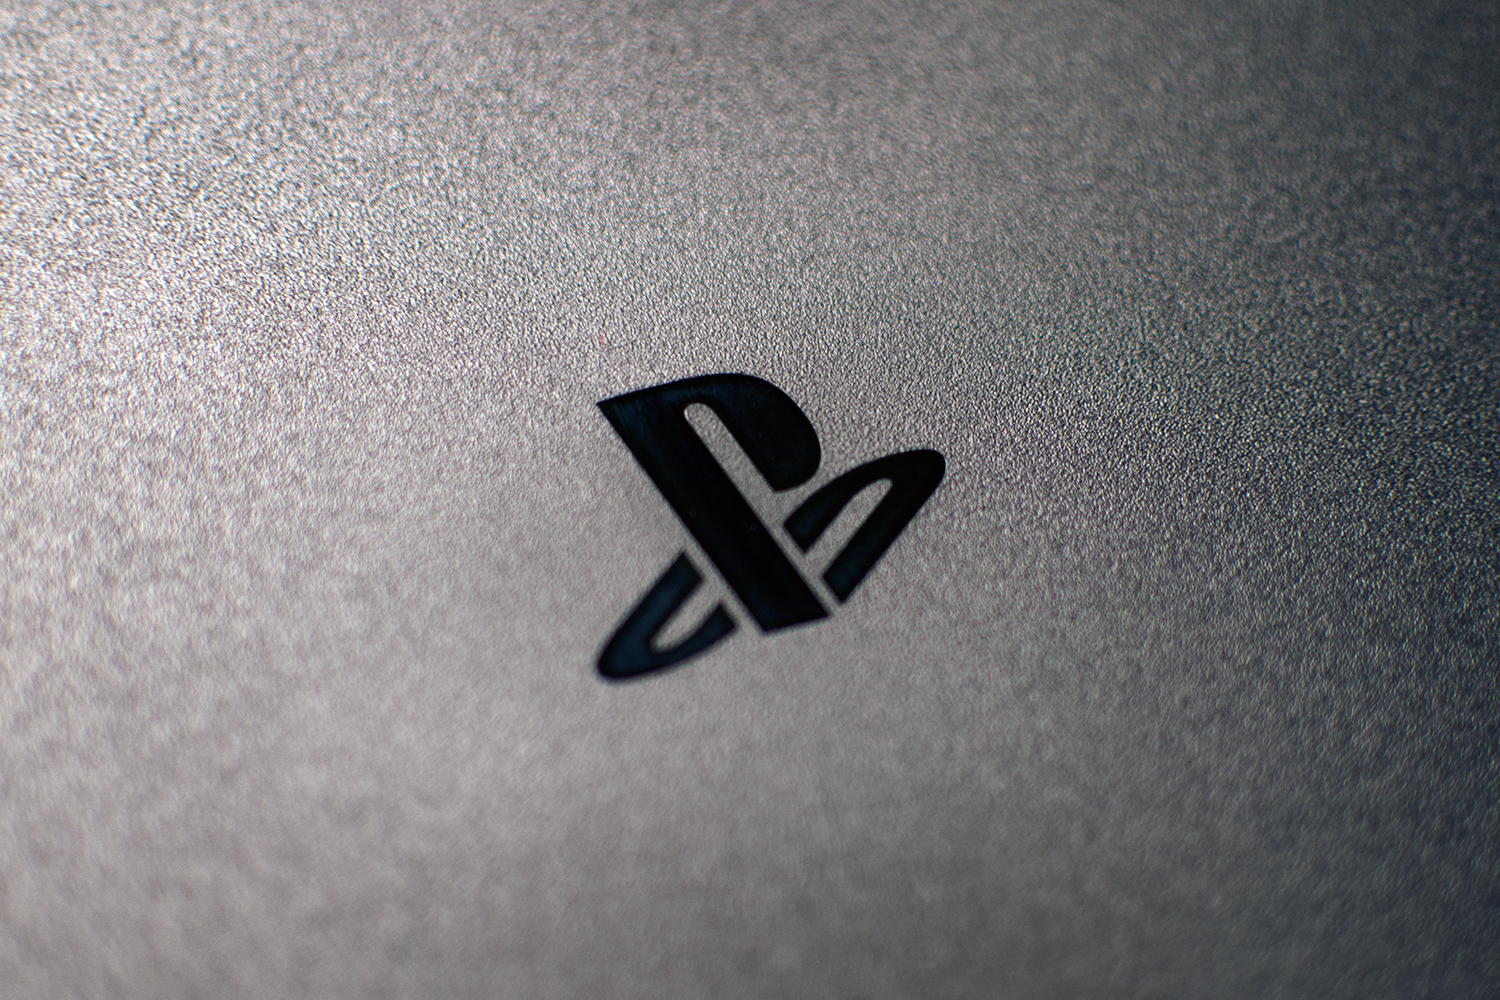 Players balk at the PlayStation Plus price hike - Xfire